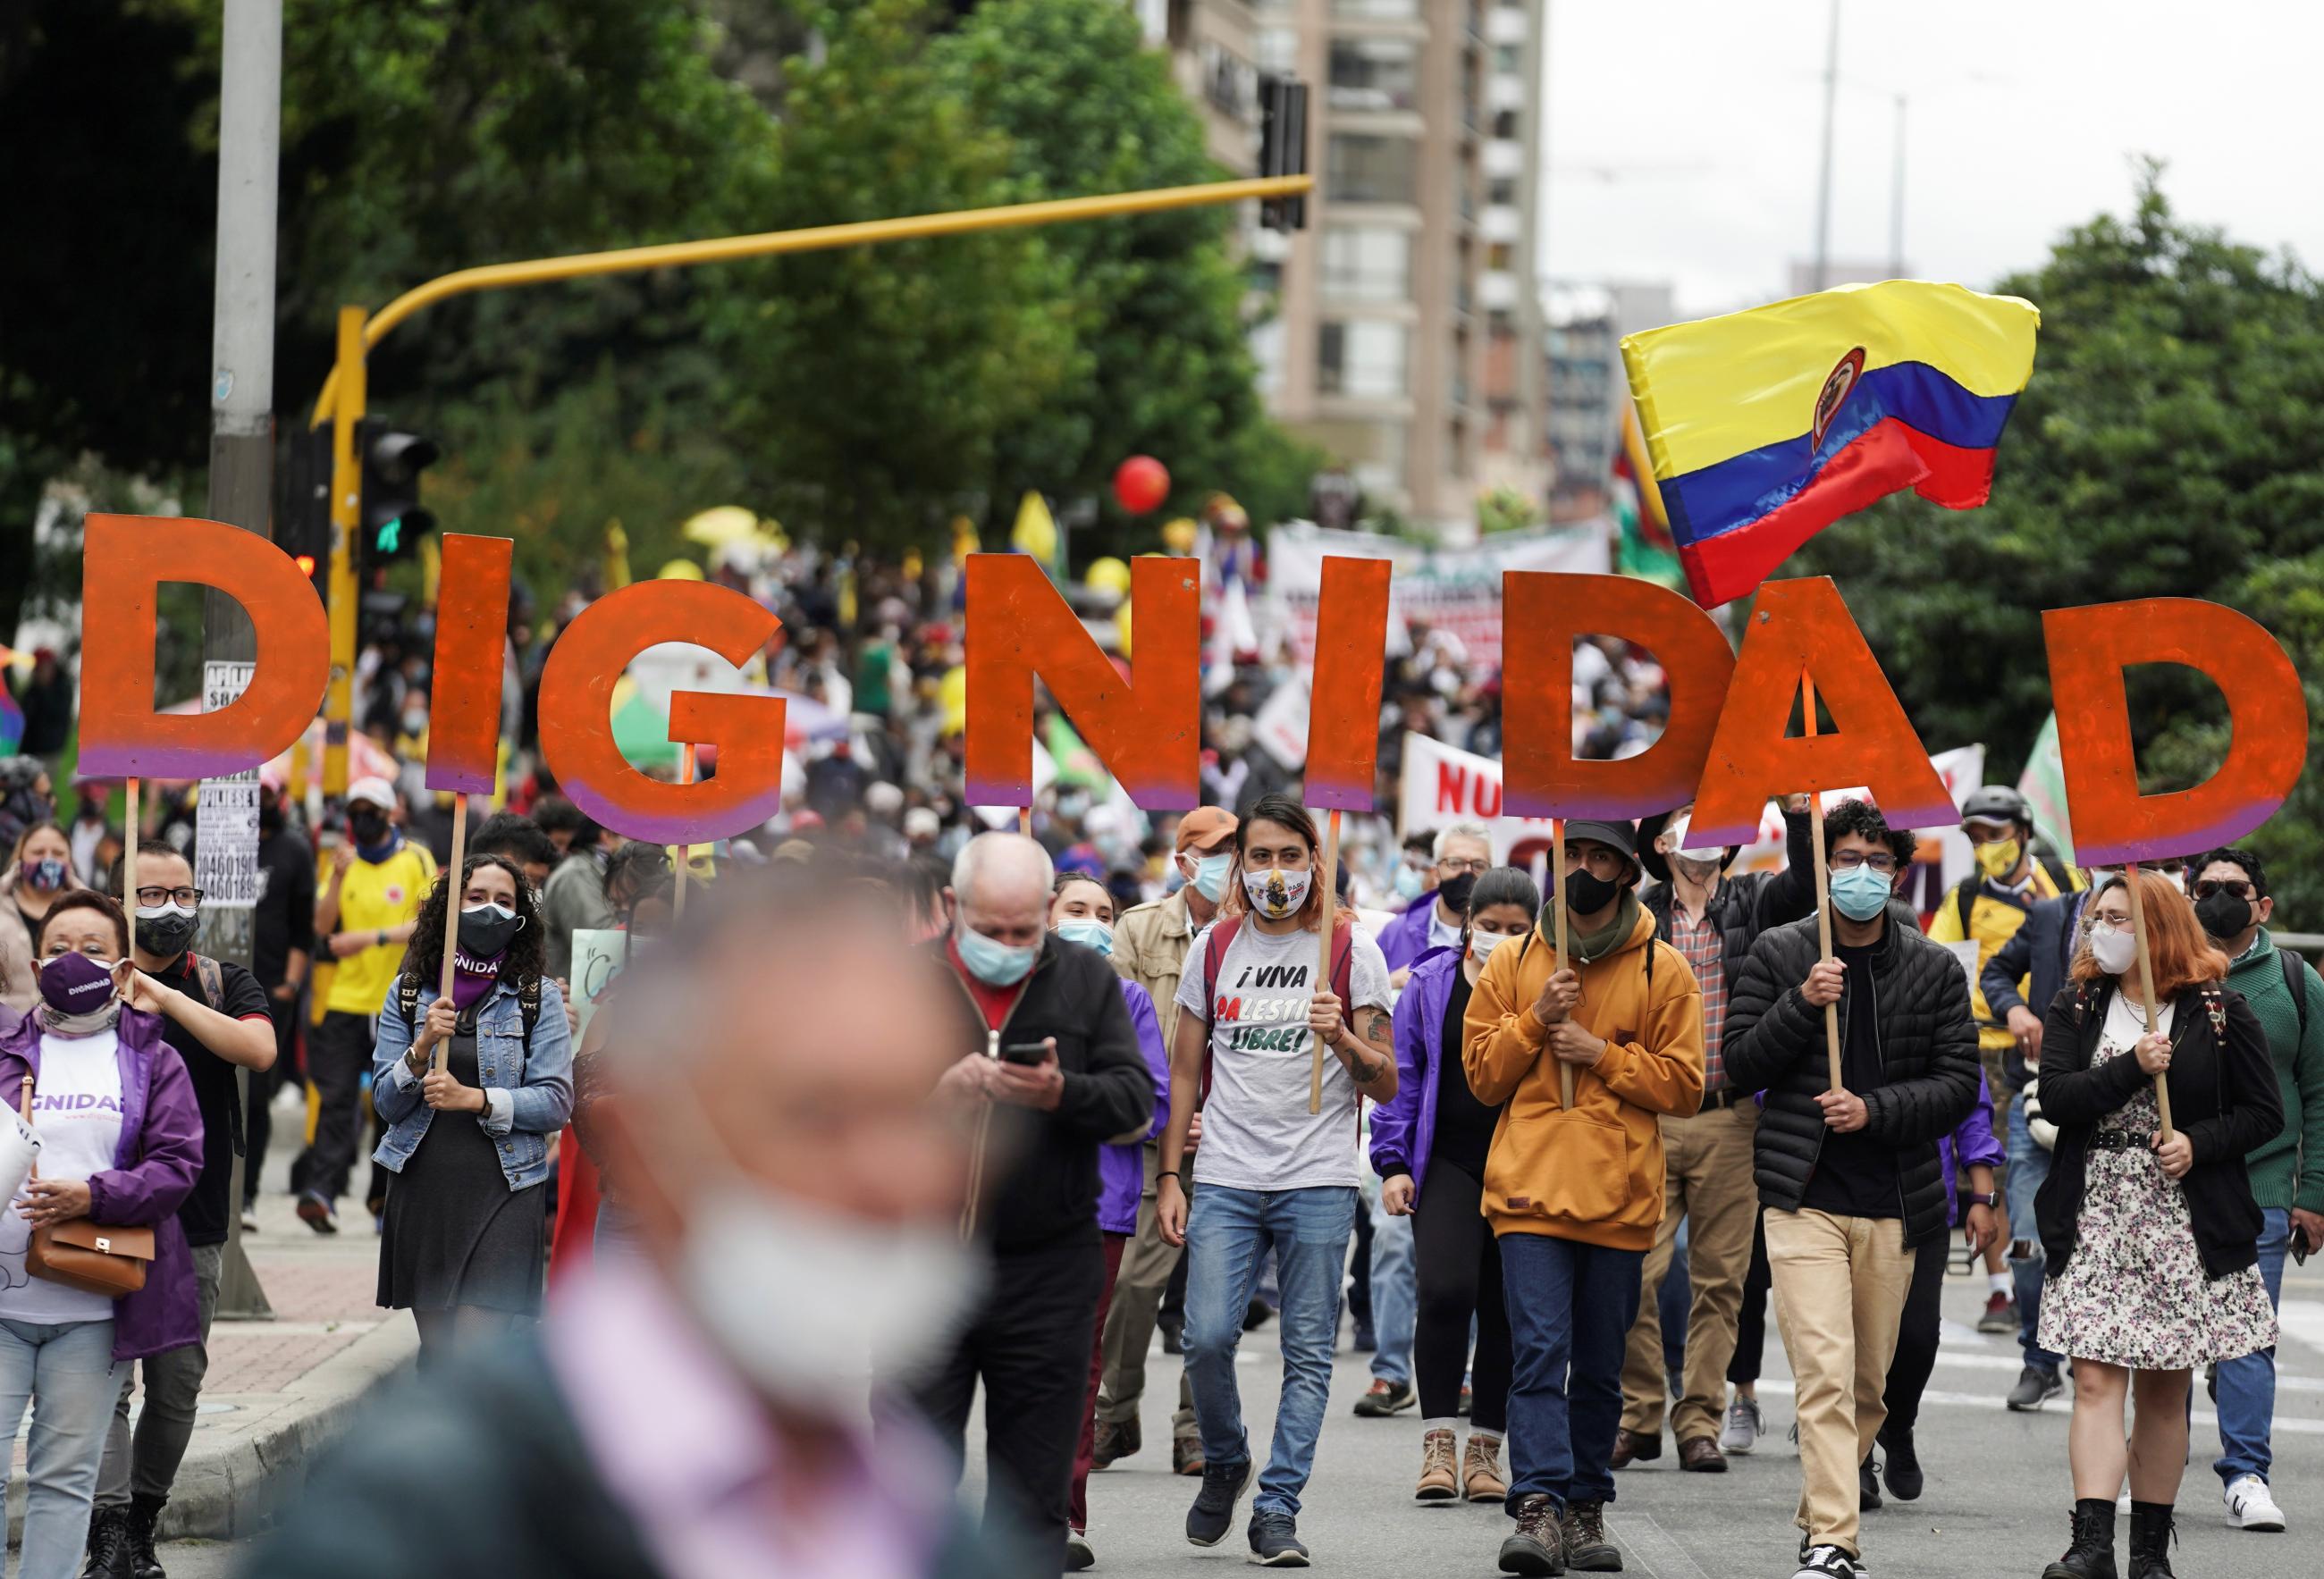 People hold large red. letters that spell “Dignidad” (Dignity) during a protest demanding the government to tackle poverty, police violence, and inequalities in healthcare and education, in Bogota, Colombia on May 26, 2021. 